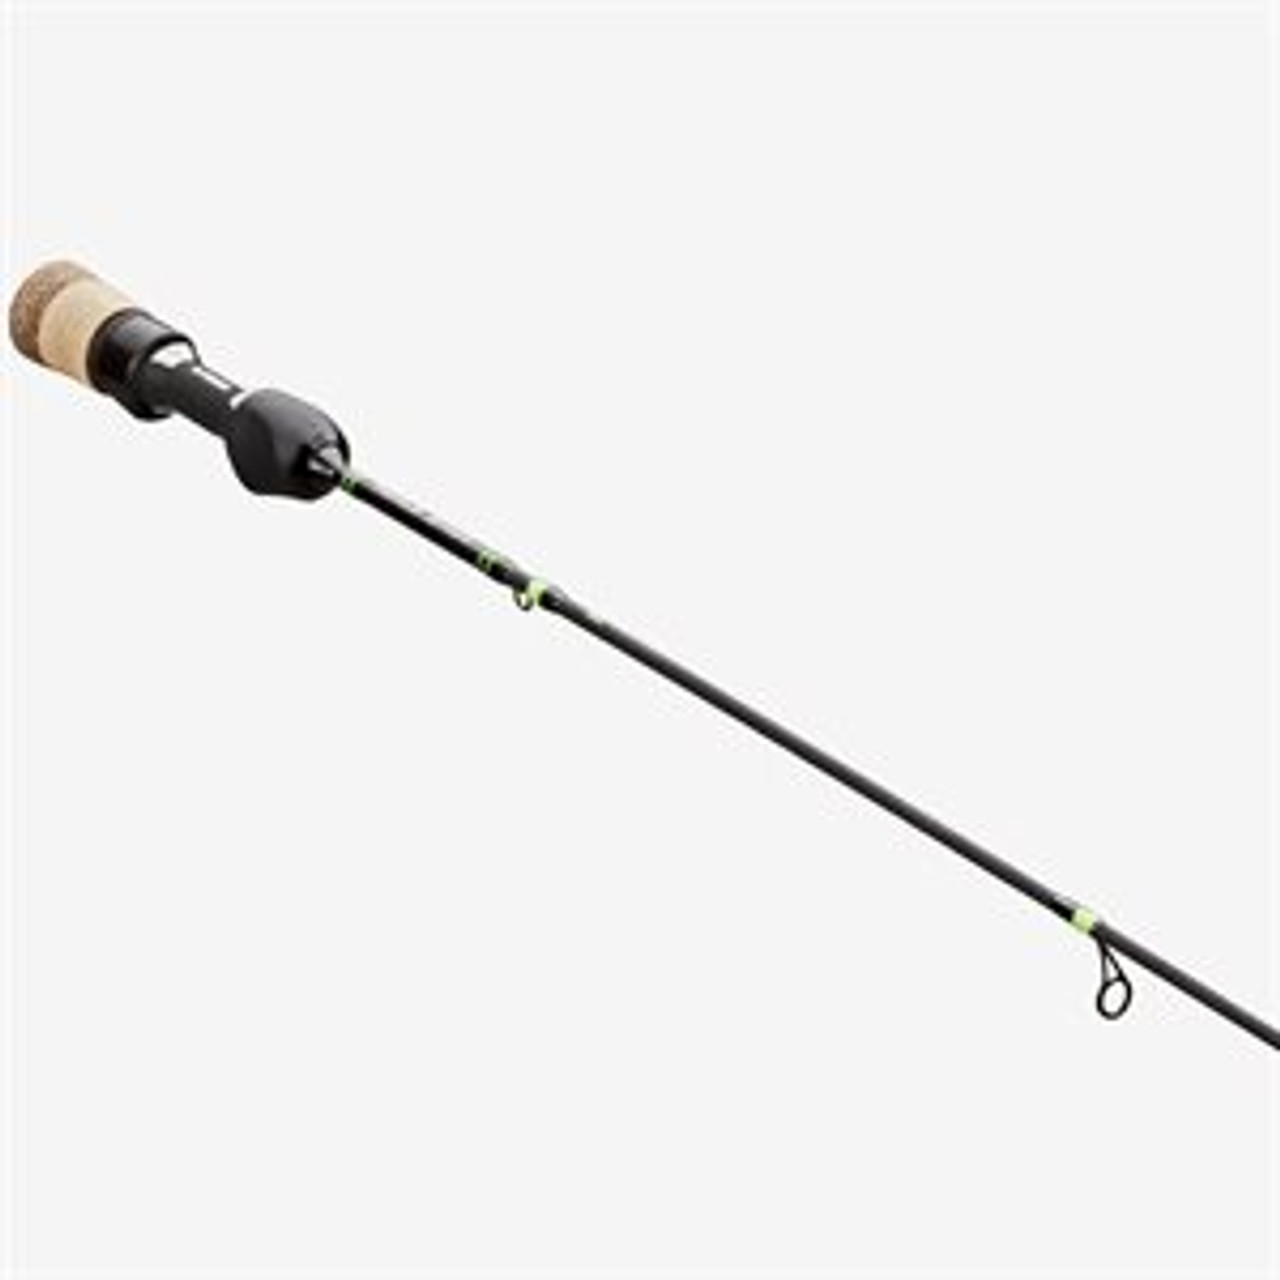 13 Fishing Tickle Stick Ice Rod 28 Mh PC2 Blank with White Reel Seat +  Larger Tip Guides - Lone Butte Sporting Goods Ltd